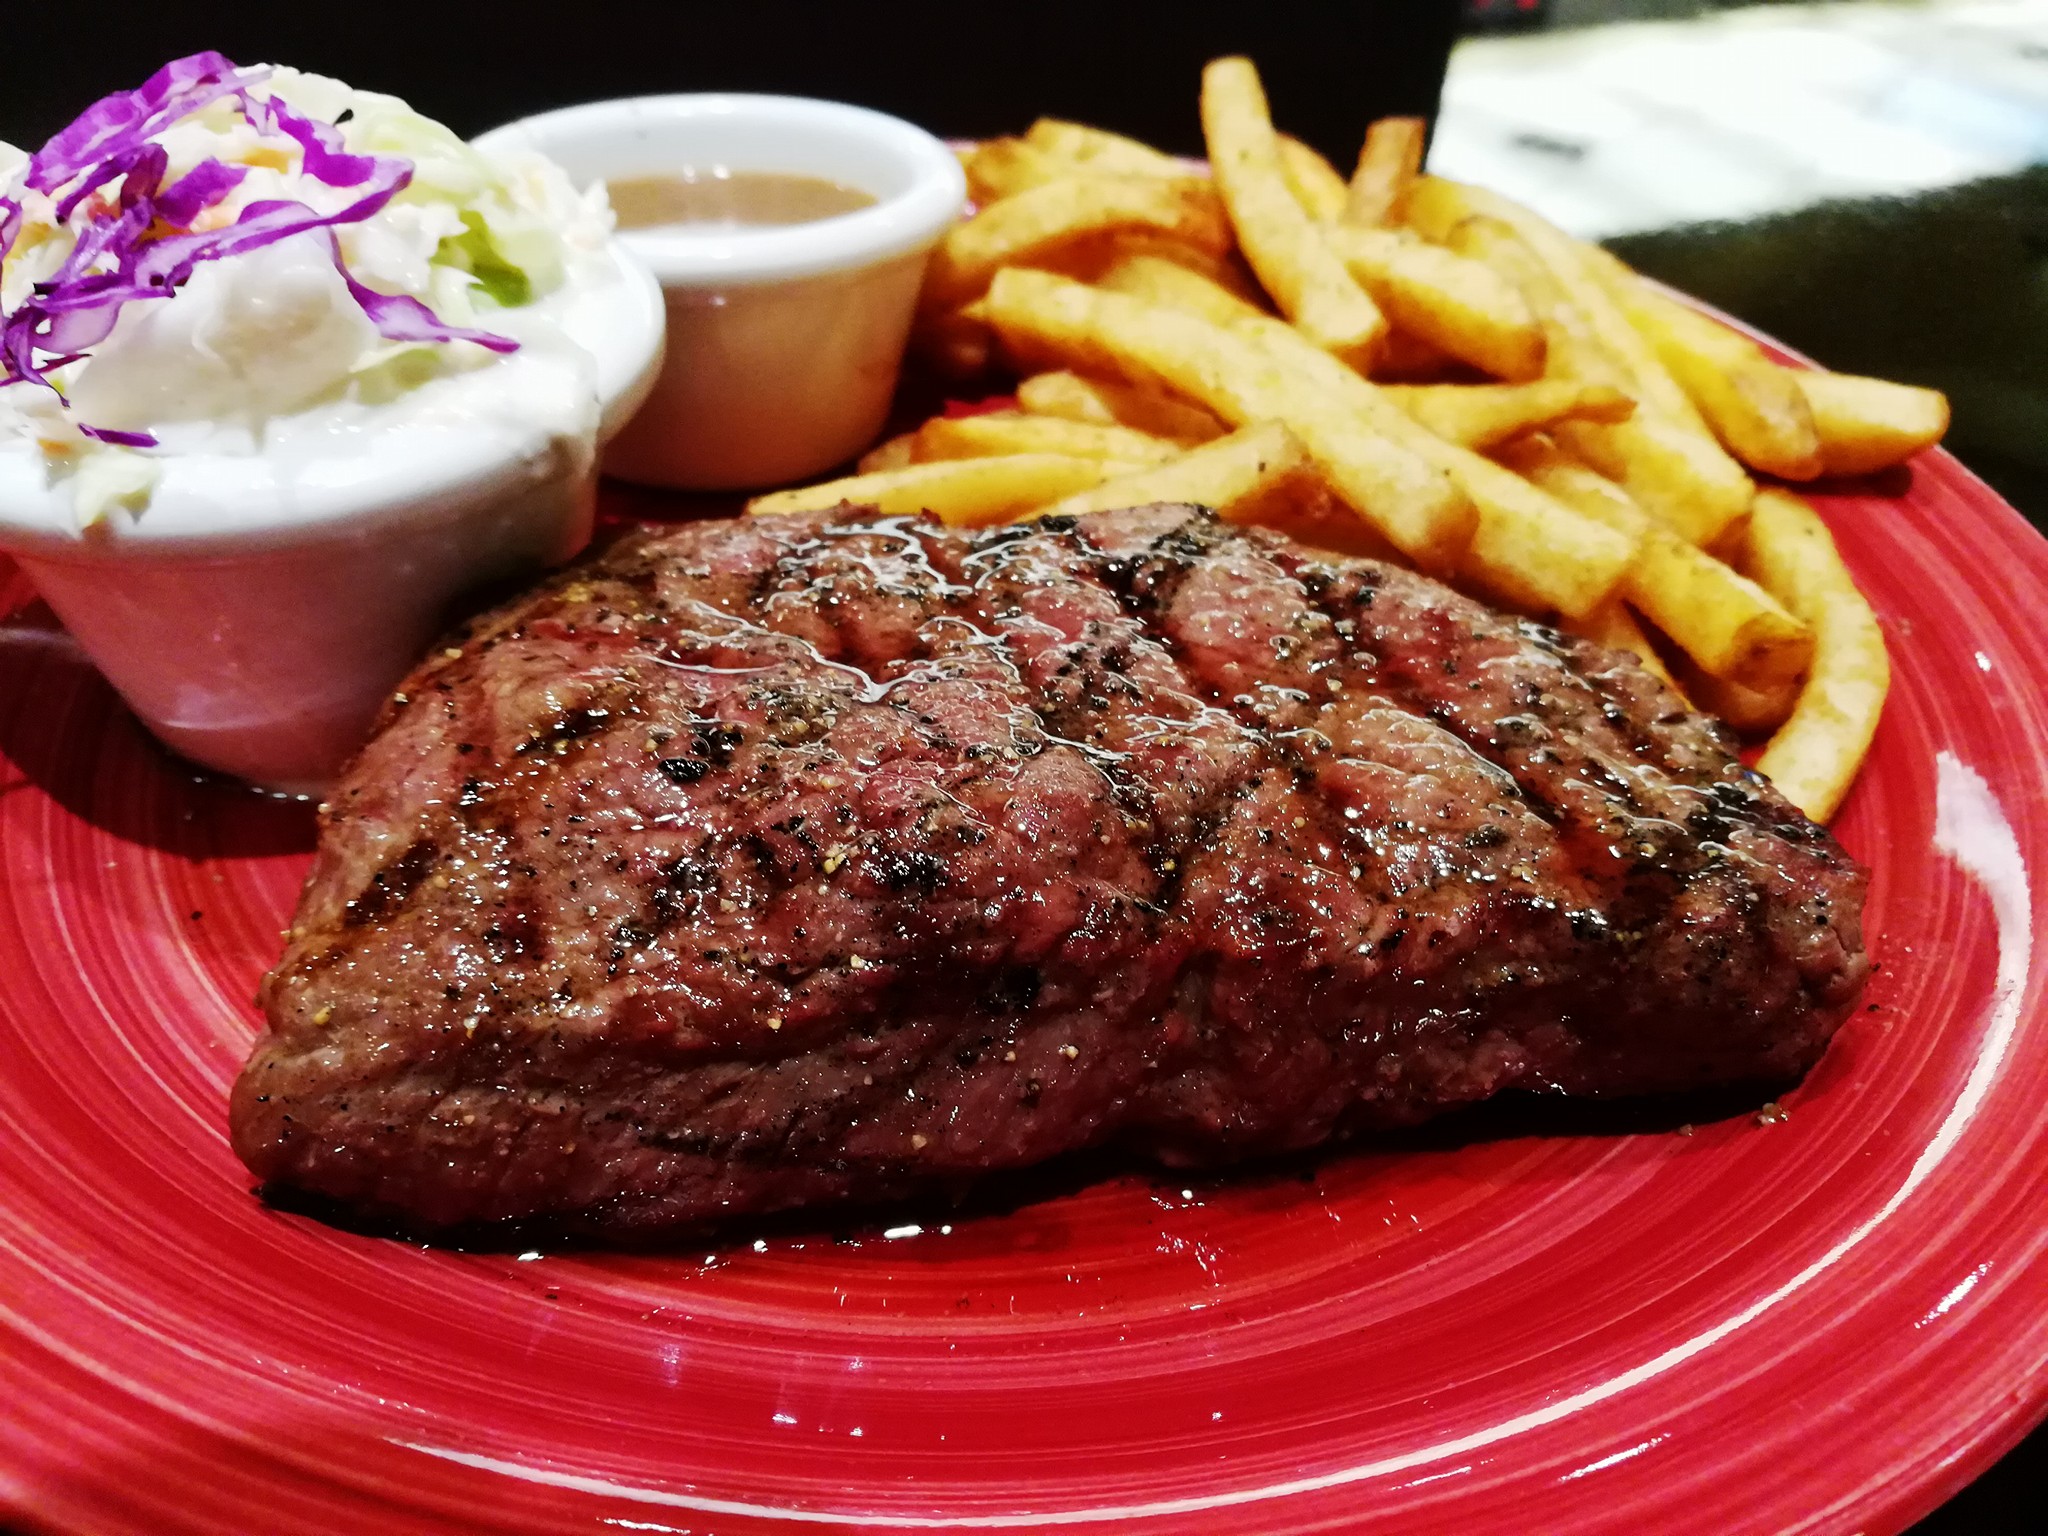 Incredibly juicy steak, medium cooked, with fries and salad, at Tony ...